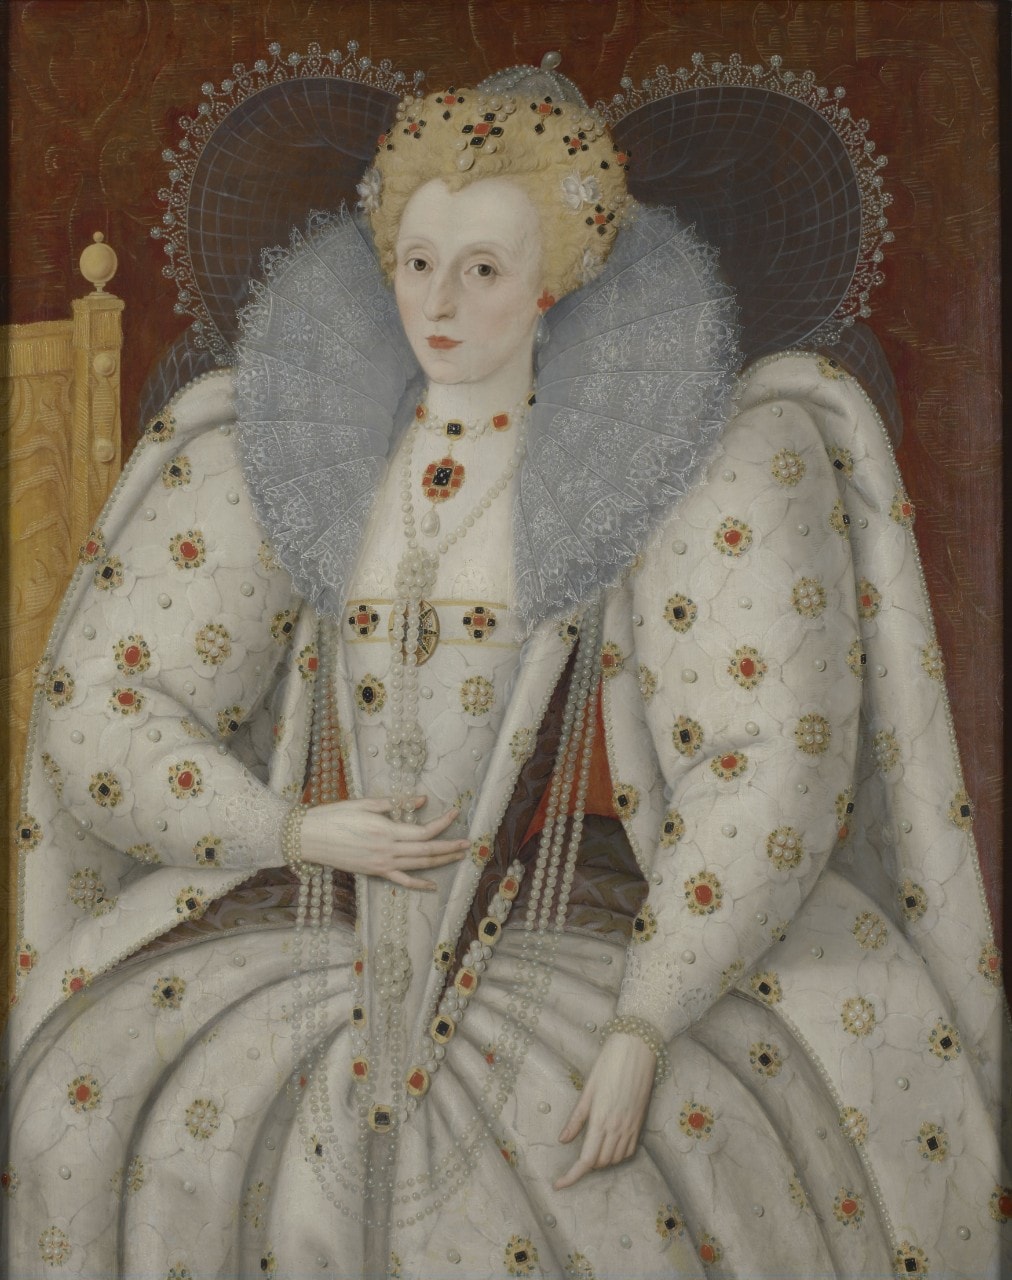 Elizabeth I of England could be seen as the real-life Daenerys Targaryen. Image: Marcus Gheeraerts the Younger/Wikimedia Commons.